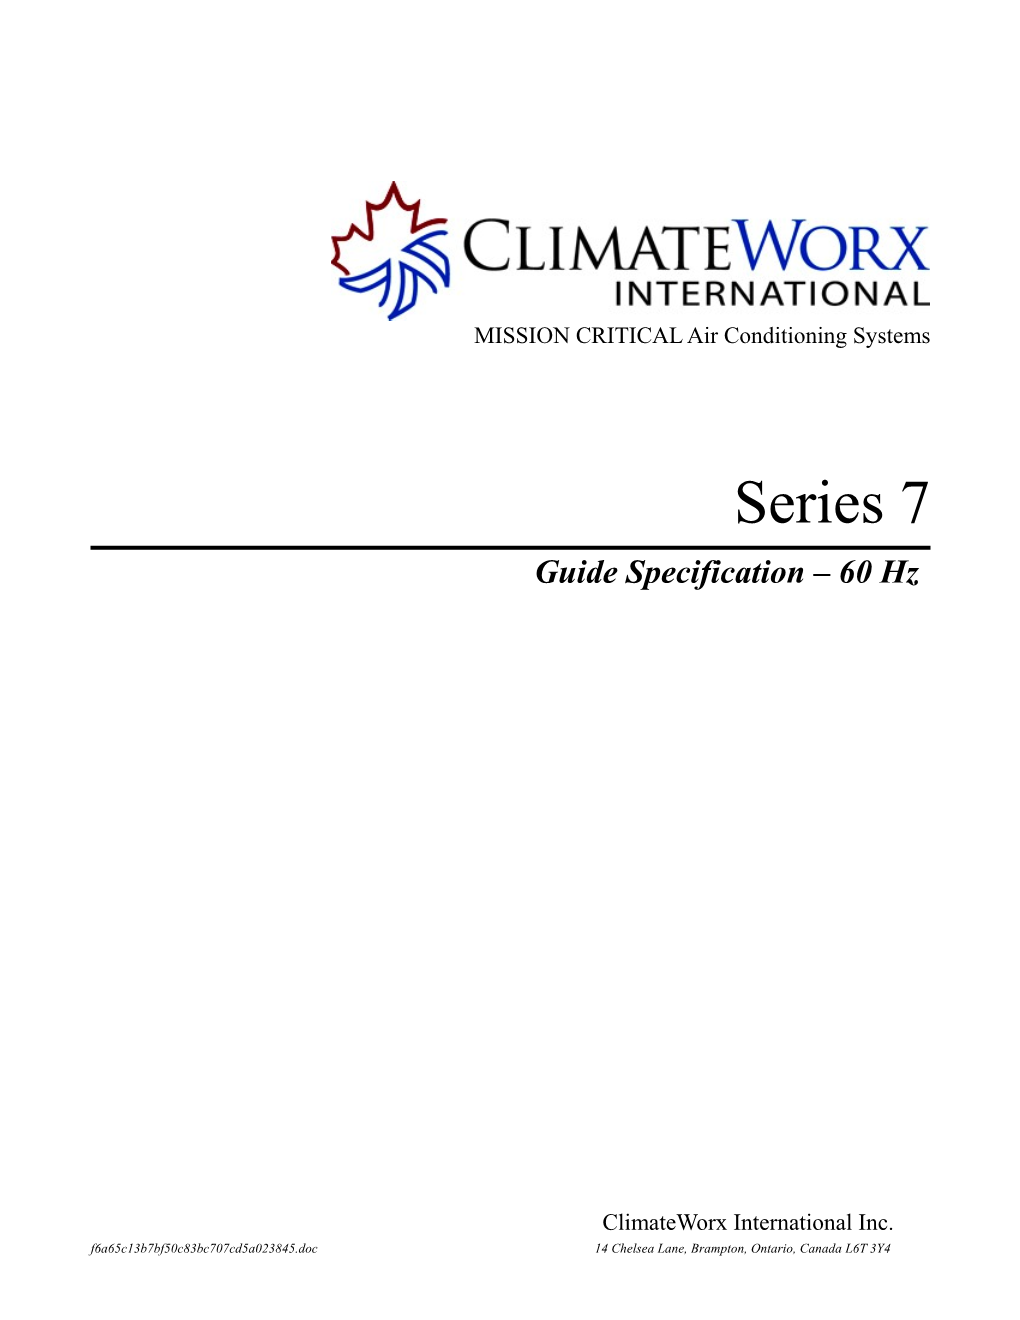 1.1 the Intelligent Precision Air-Conditioning System Shall Be a Climateworx Series 7 Model